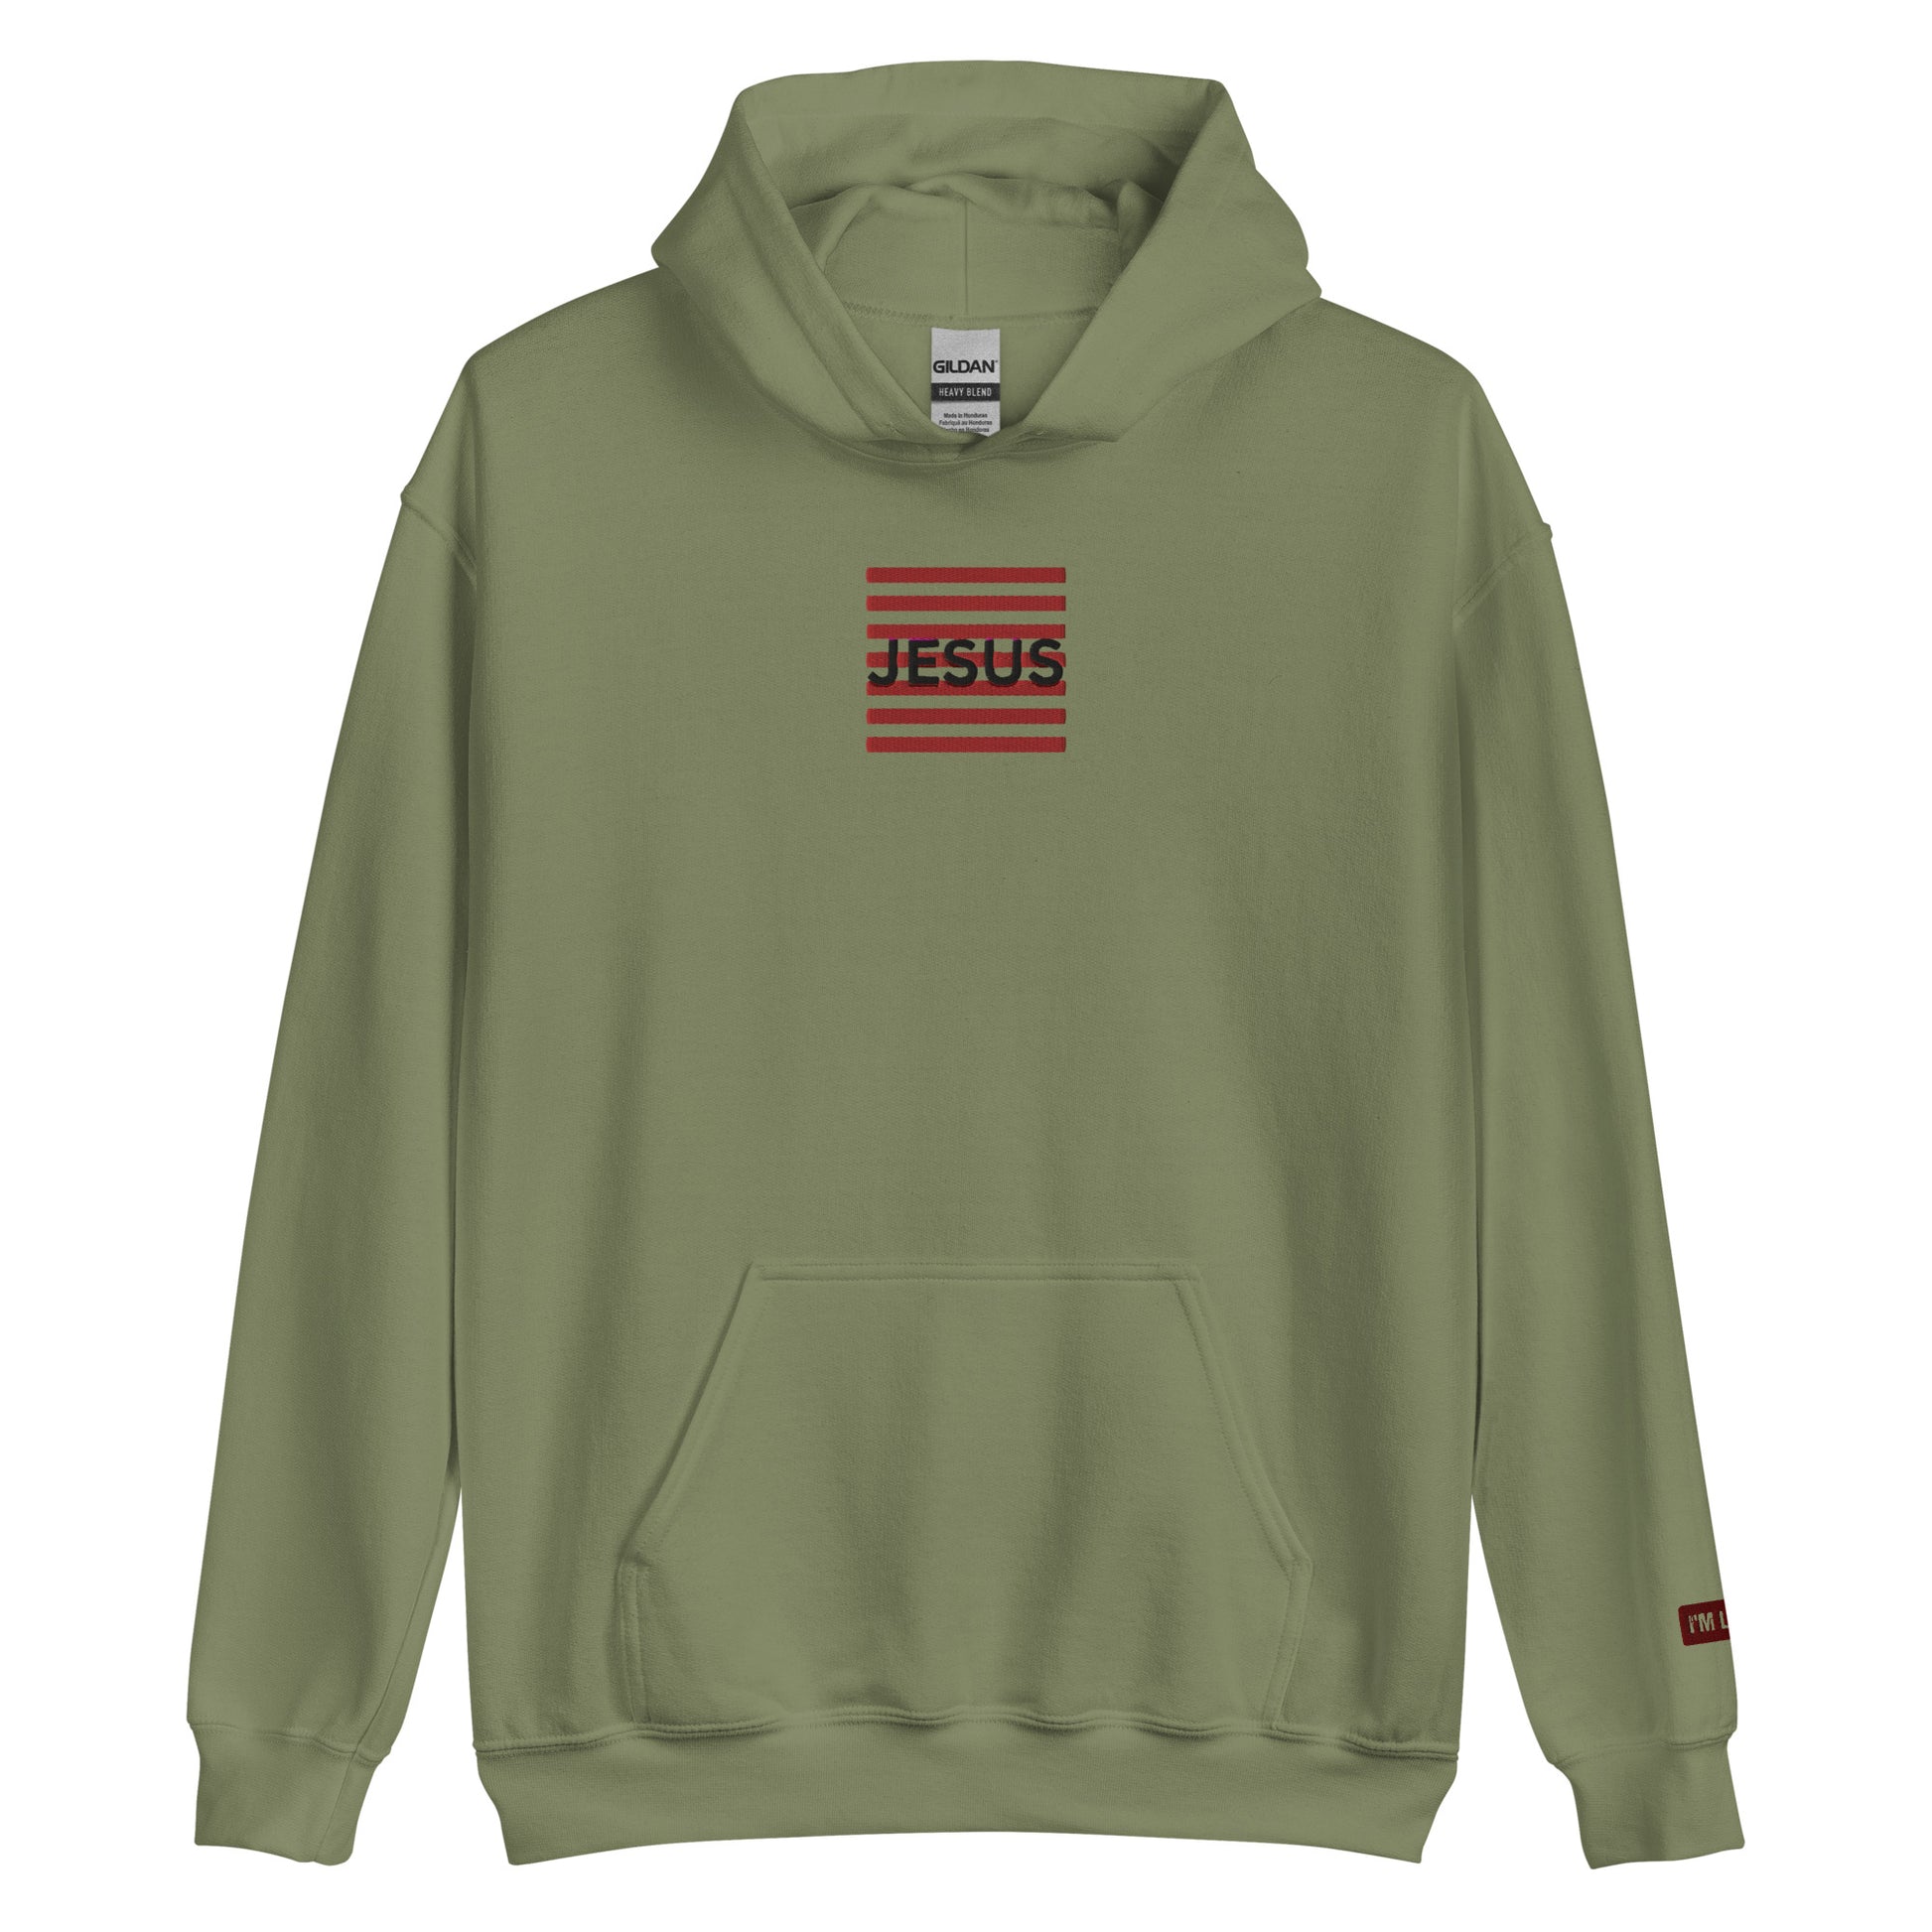 Jesus Embroidery Unisex Hoodie - Military Green / S